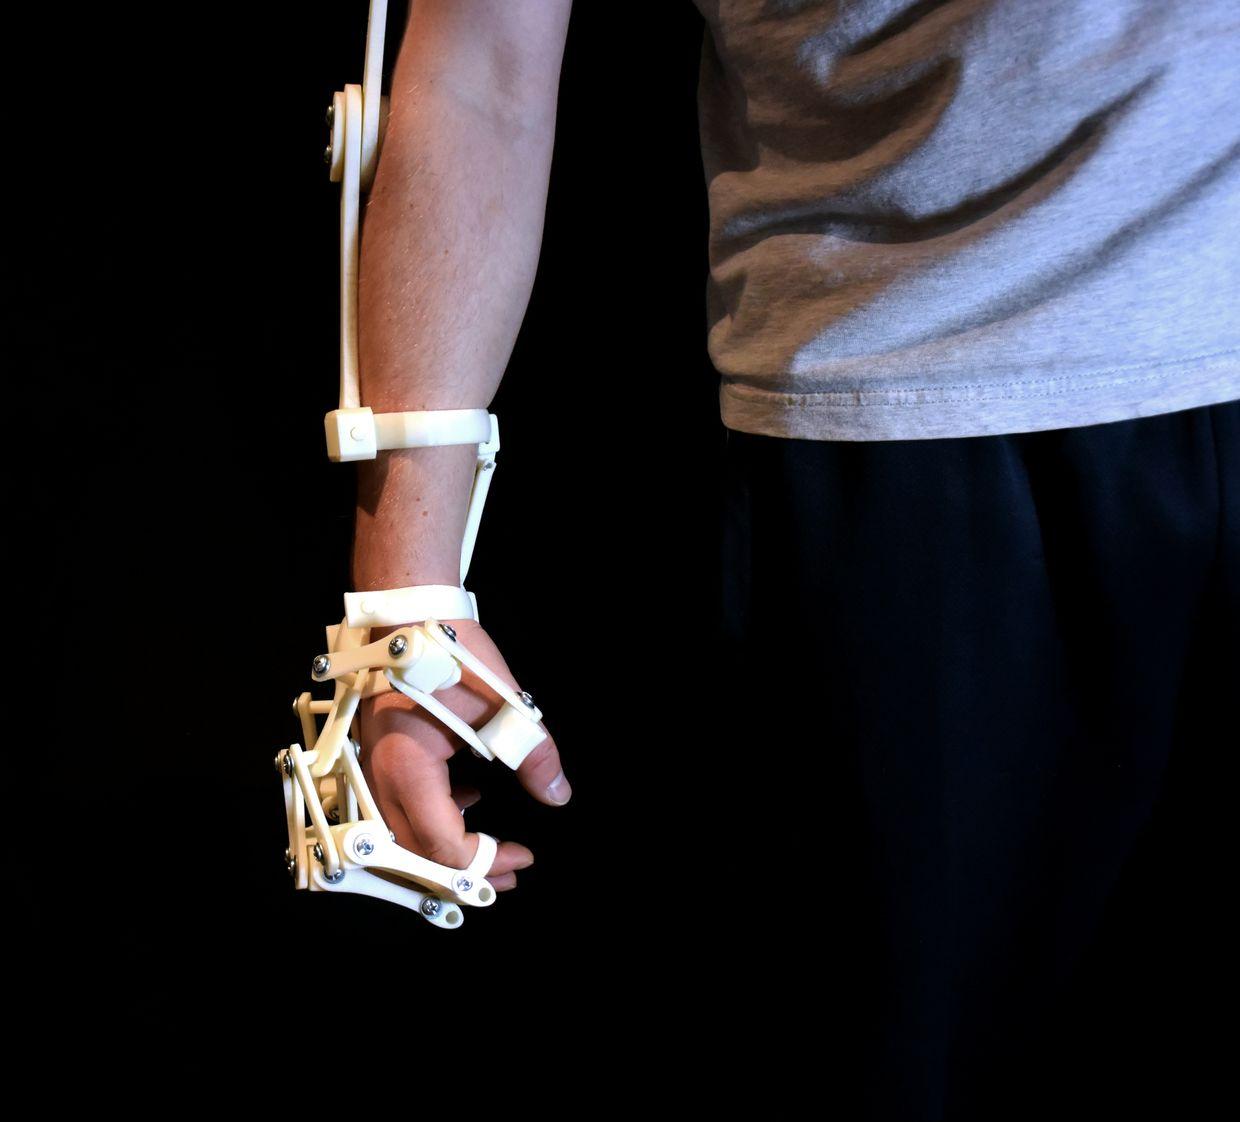 Alex Czech's 3D Printable Exoskeleton Hands are Now Extended to Arms - 3DPrint.com | The Voice of Additive Manufacturing